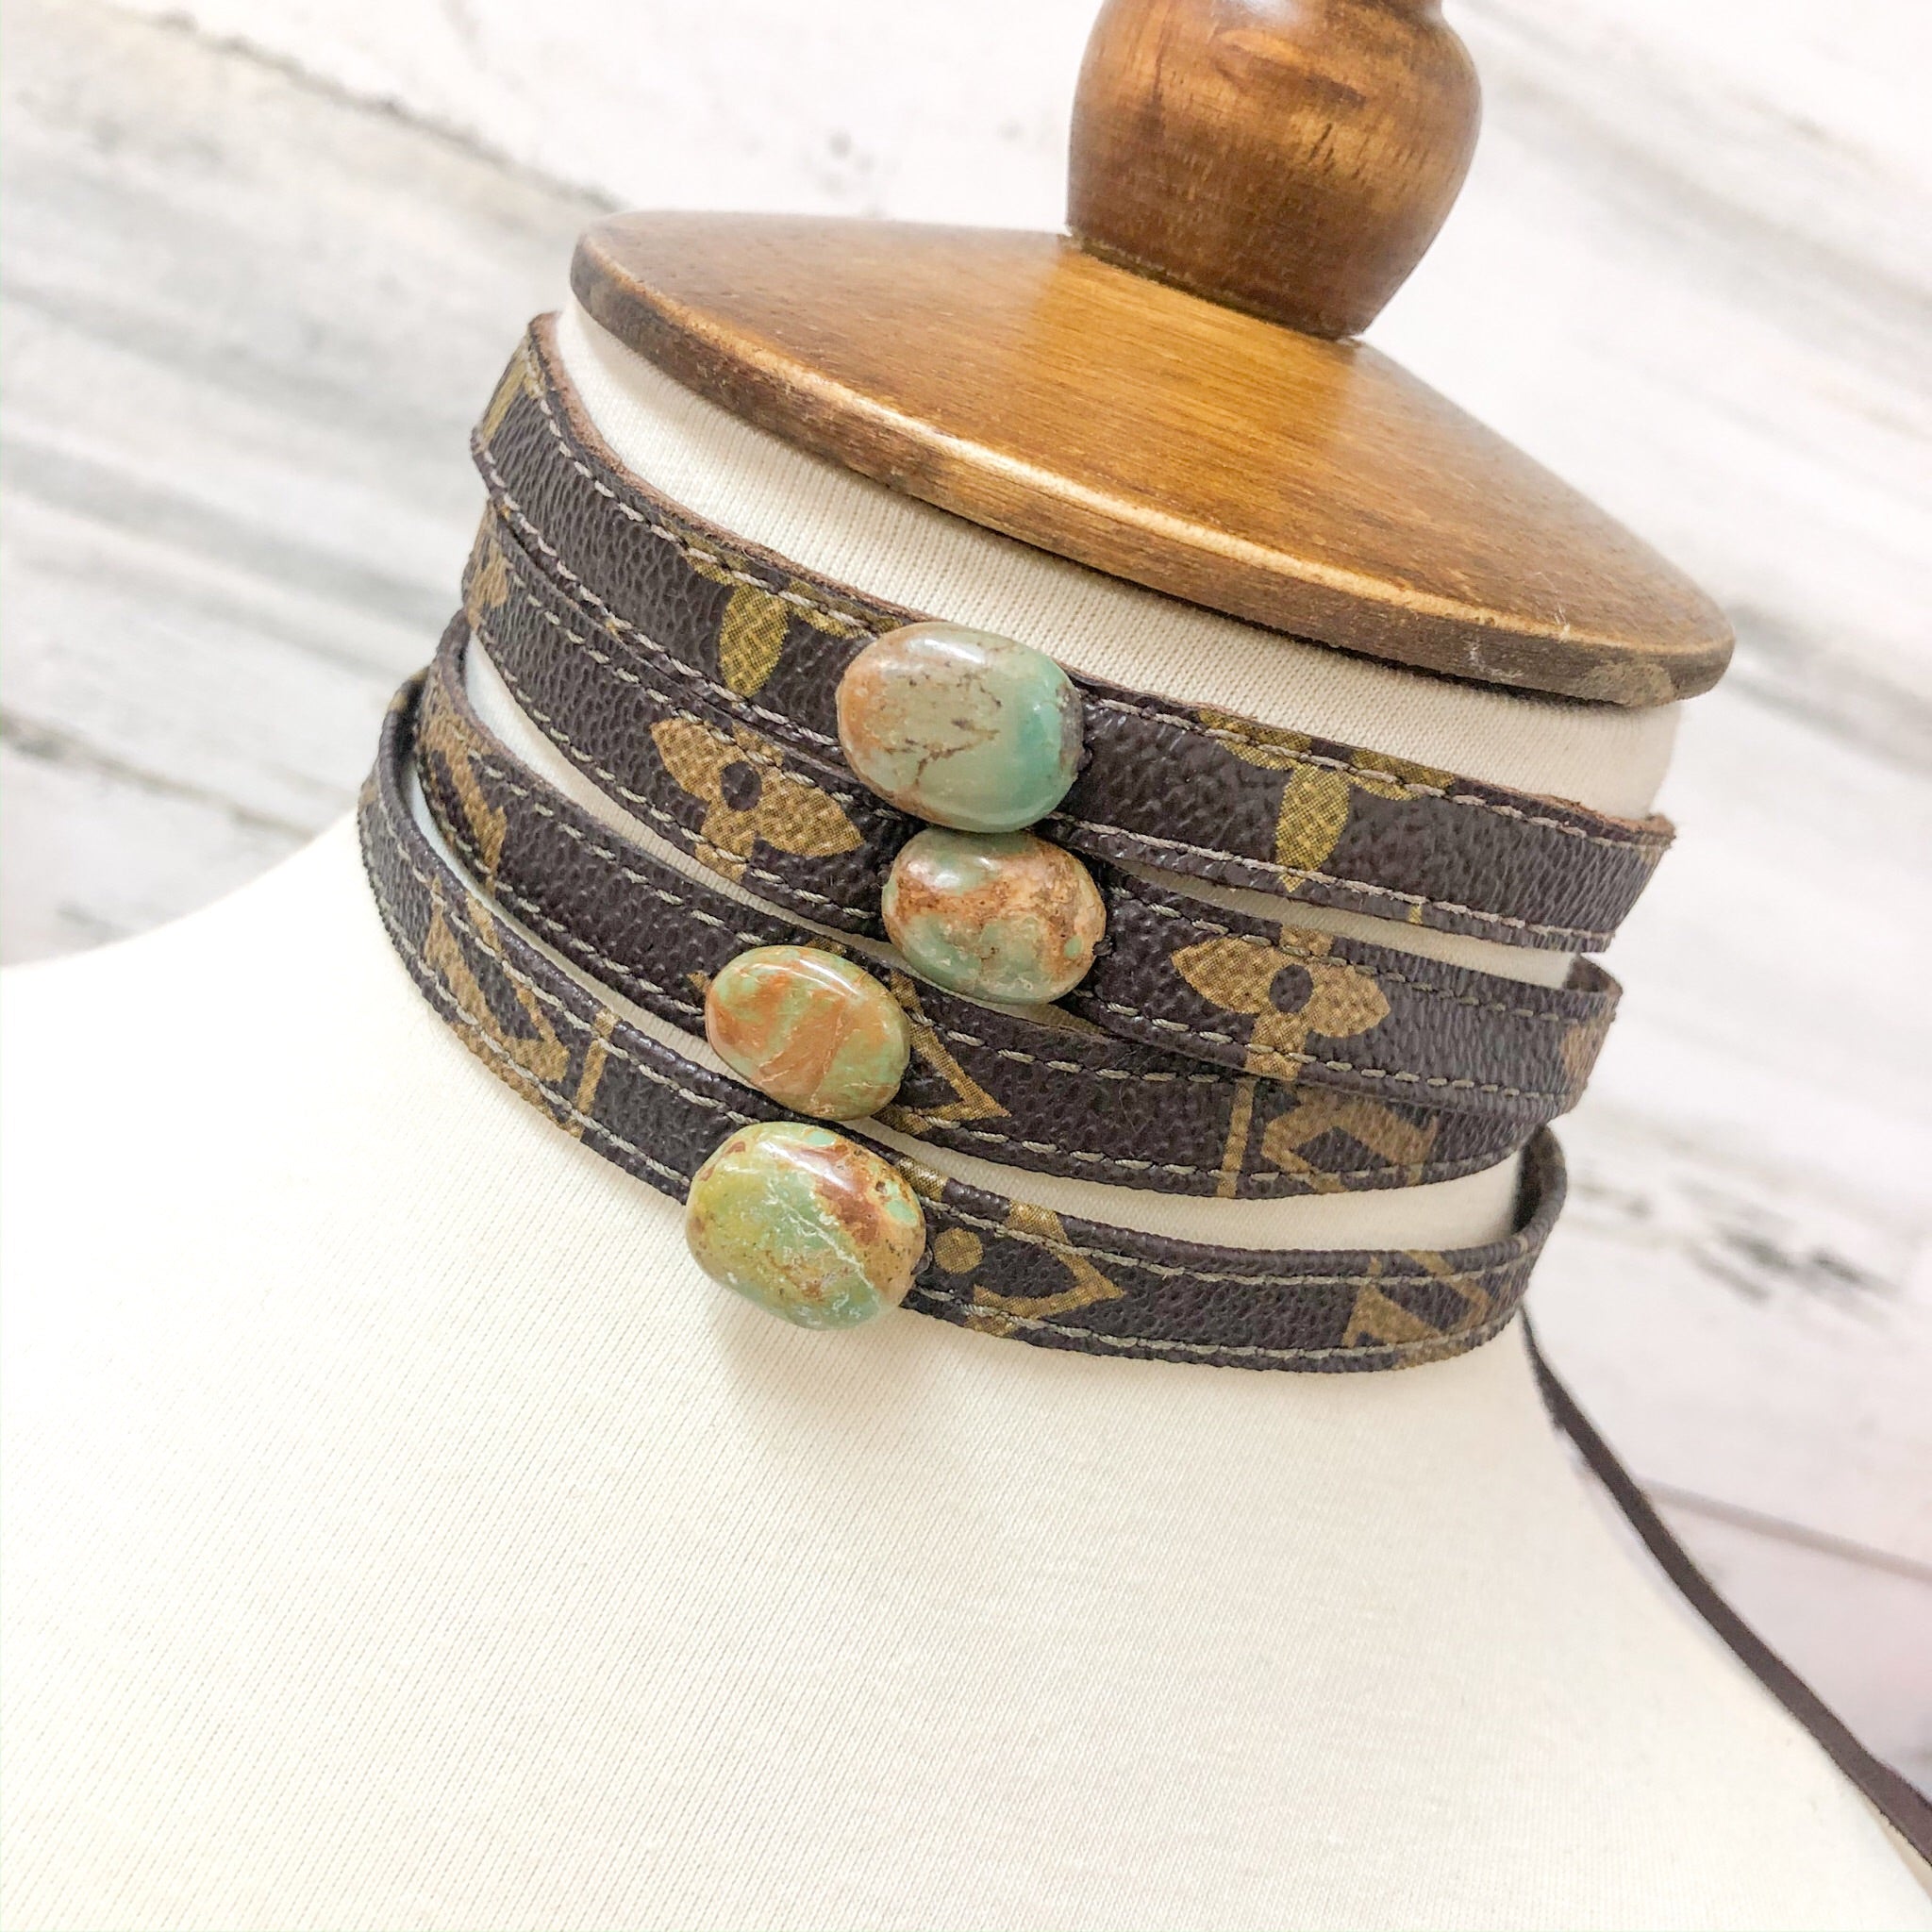 Embellished Leather Choker Necklace with Turquoise Green Stone - Giddy Up Glamour Boutique